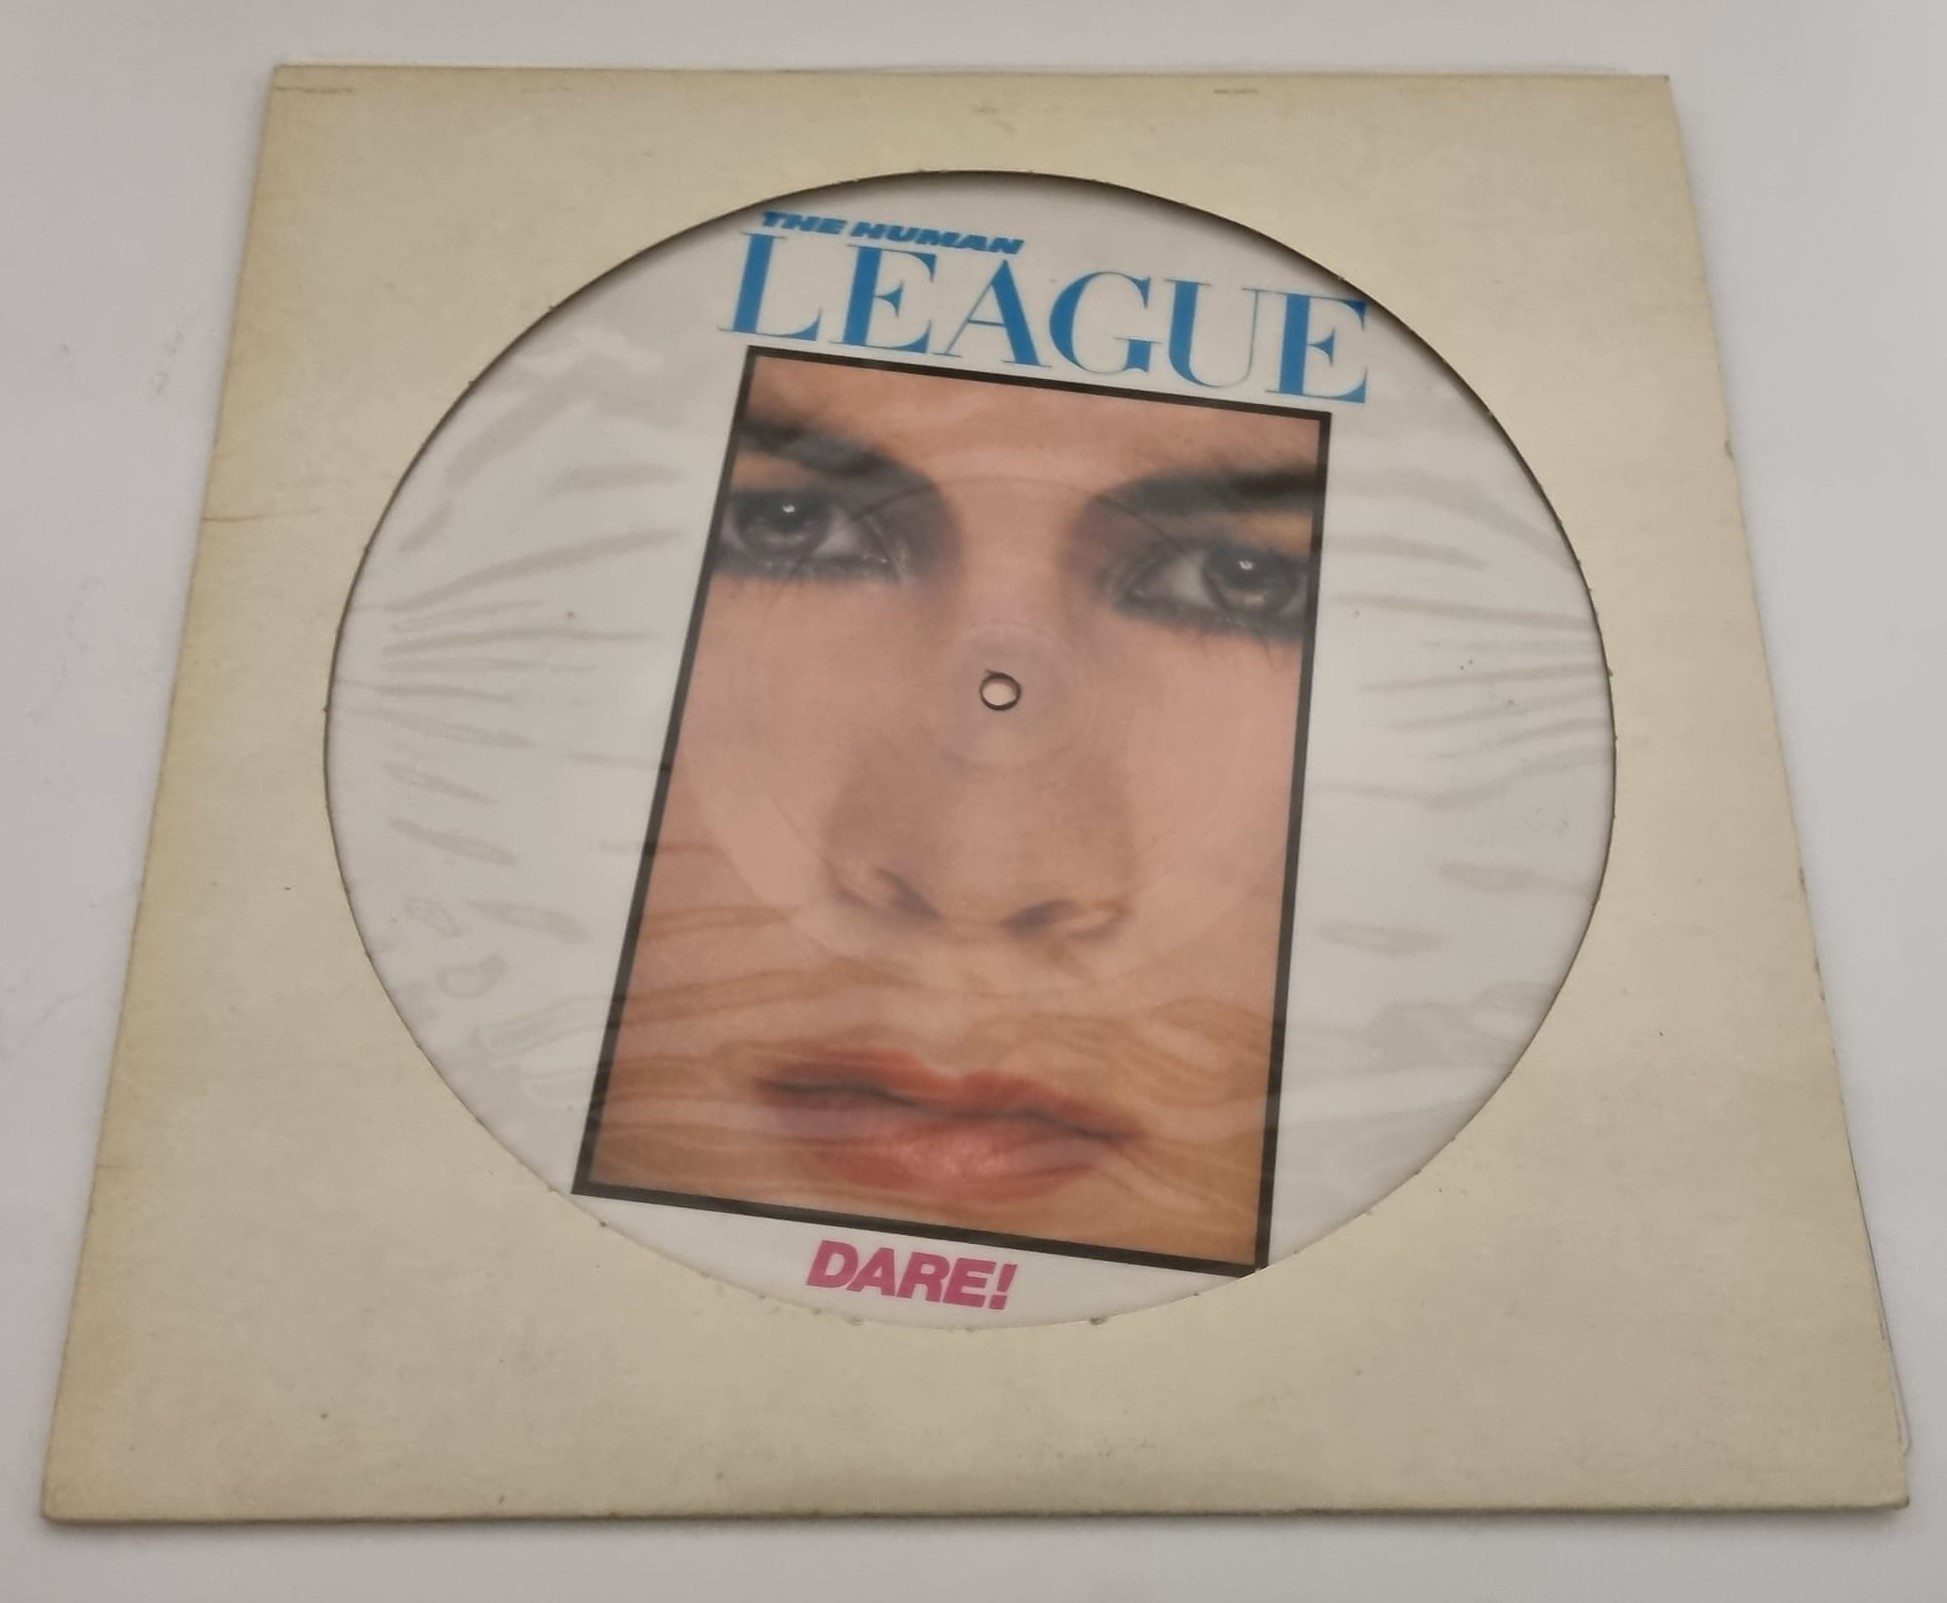 Buy this rare Human League record by clicking here